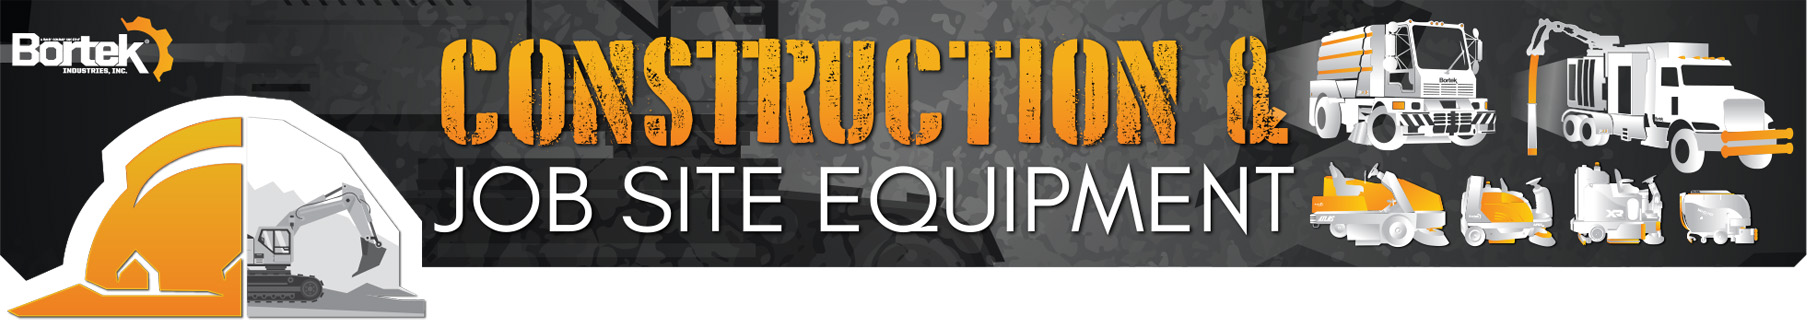 Construction & Job Site Equipment - Hydro Excavators, Street Sweepers, Floor Scrubbers, and Sweepers for sale and rental.